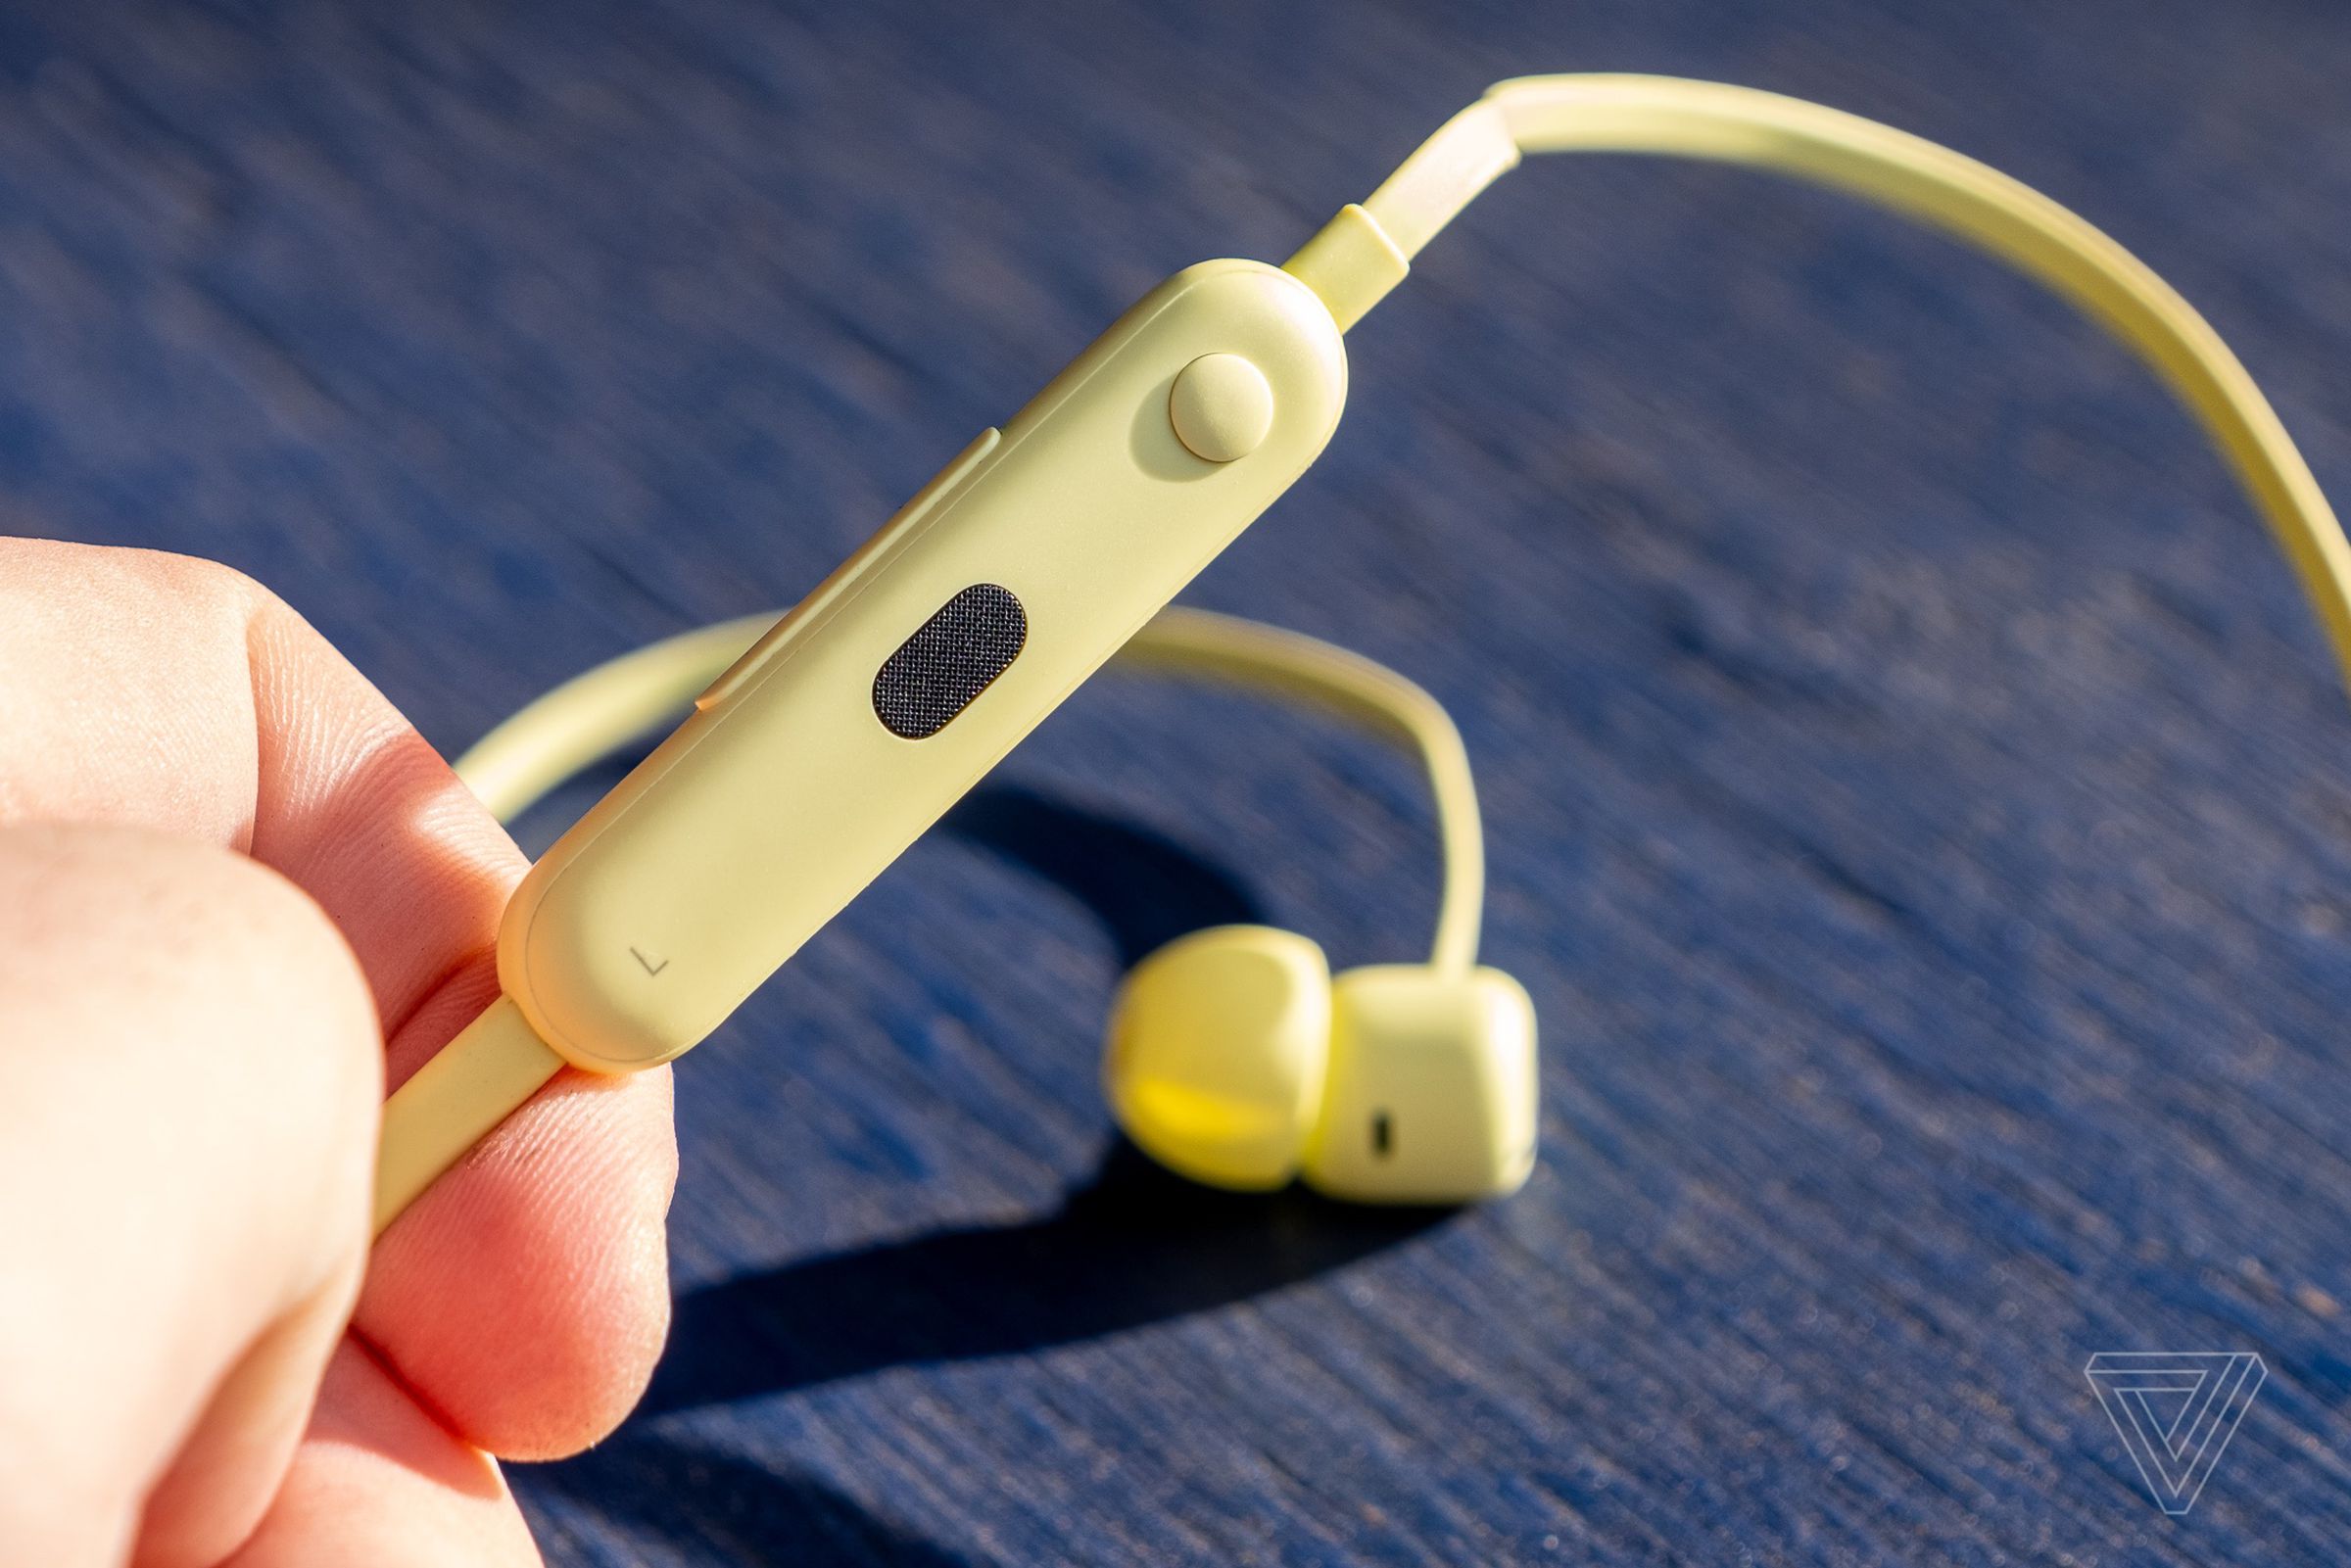 The Beats Flex have redesigned controls with a volume rocker and multi-function button.